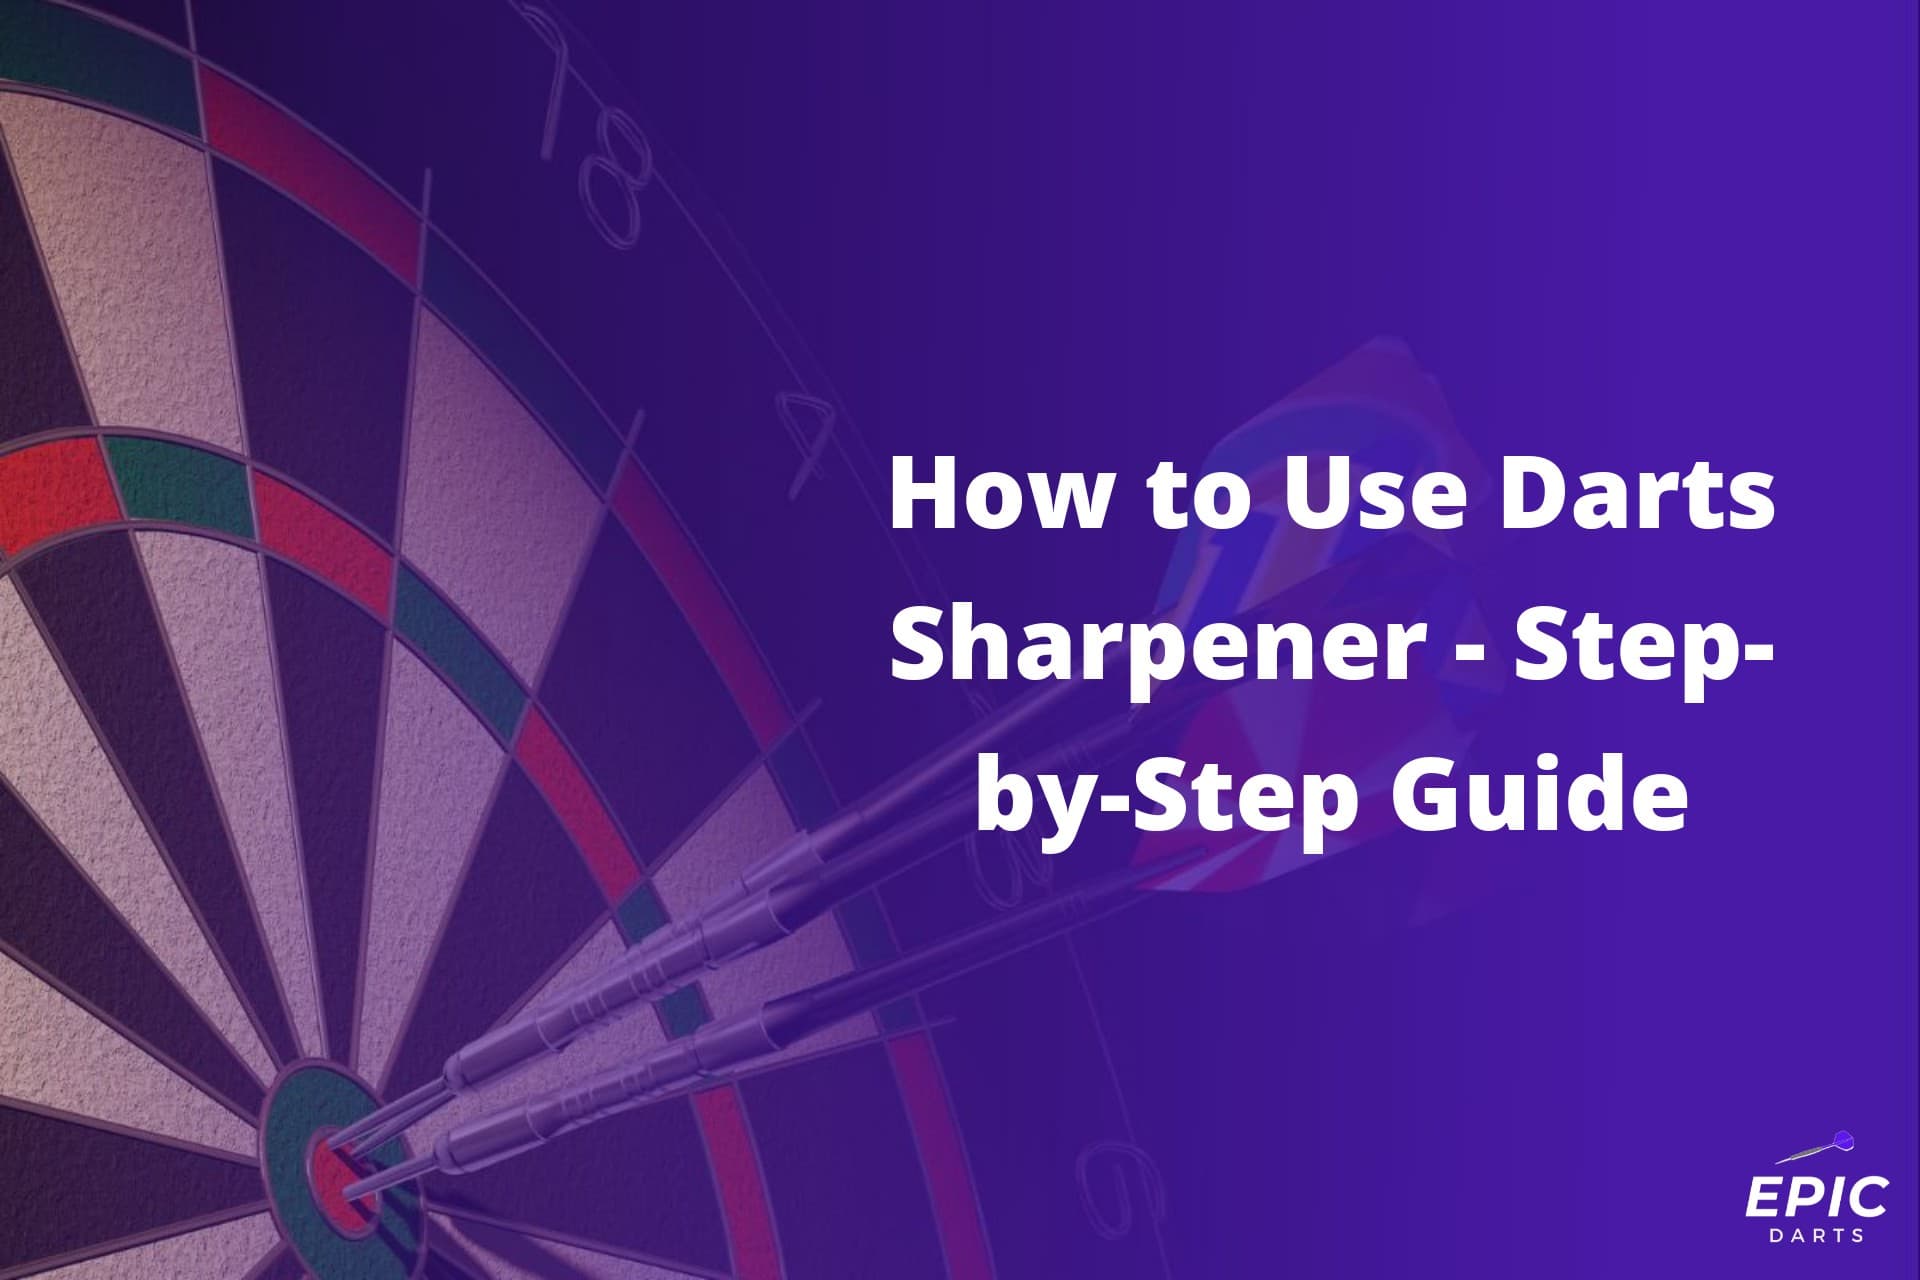 How to Use Darts Sharpener Step by Step Guide